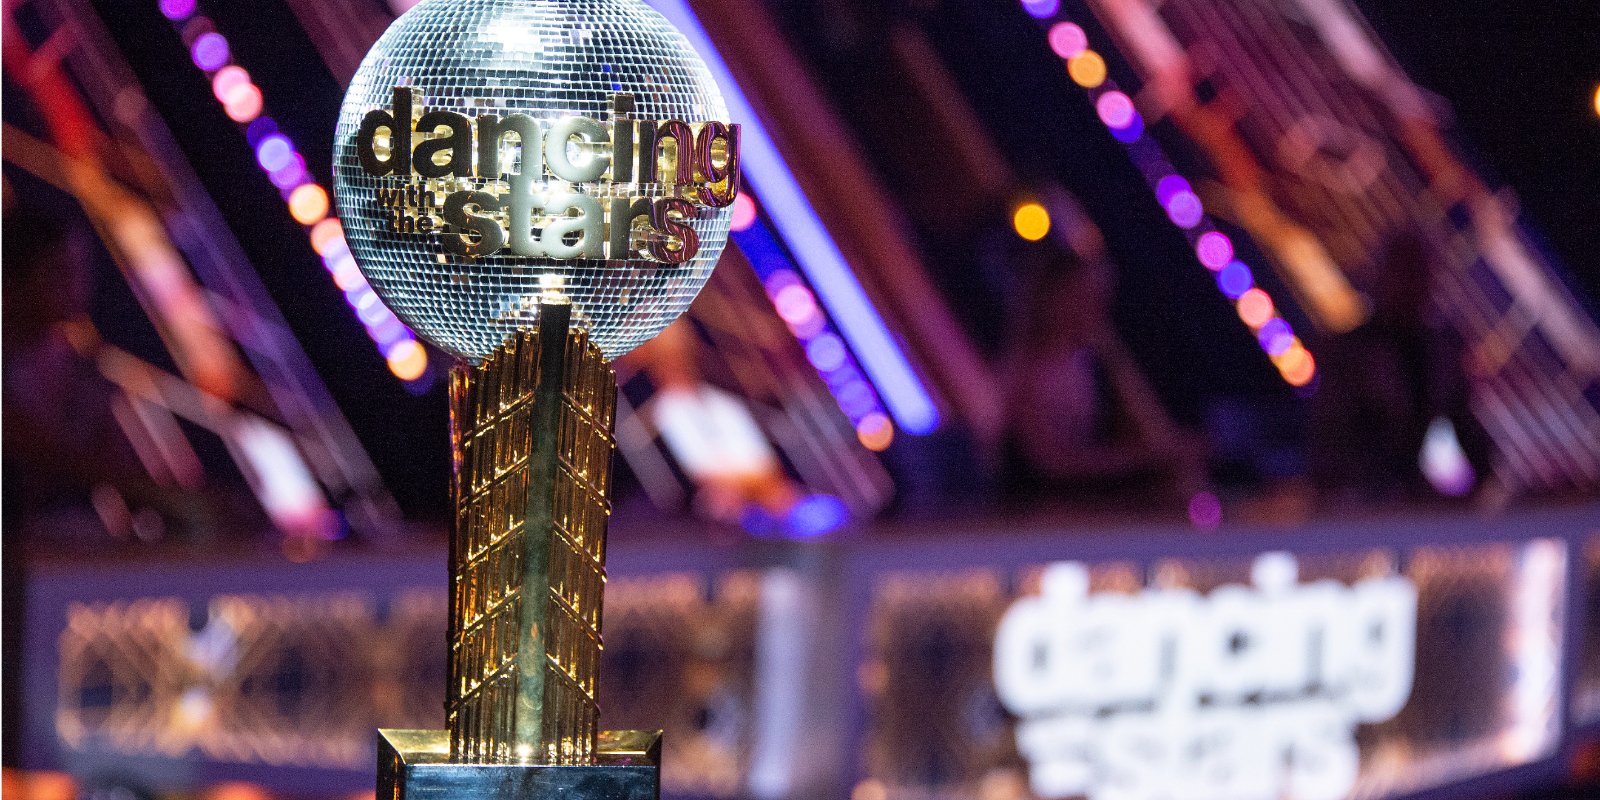 'Dancing with the Stars' mirrorball trophy on the set of the Disney+ series.